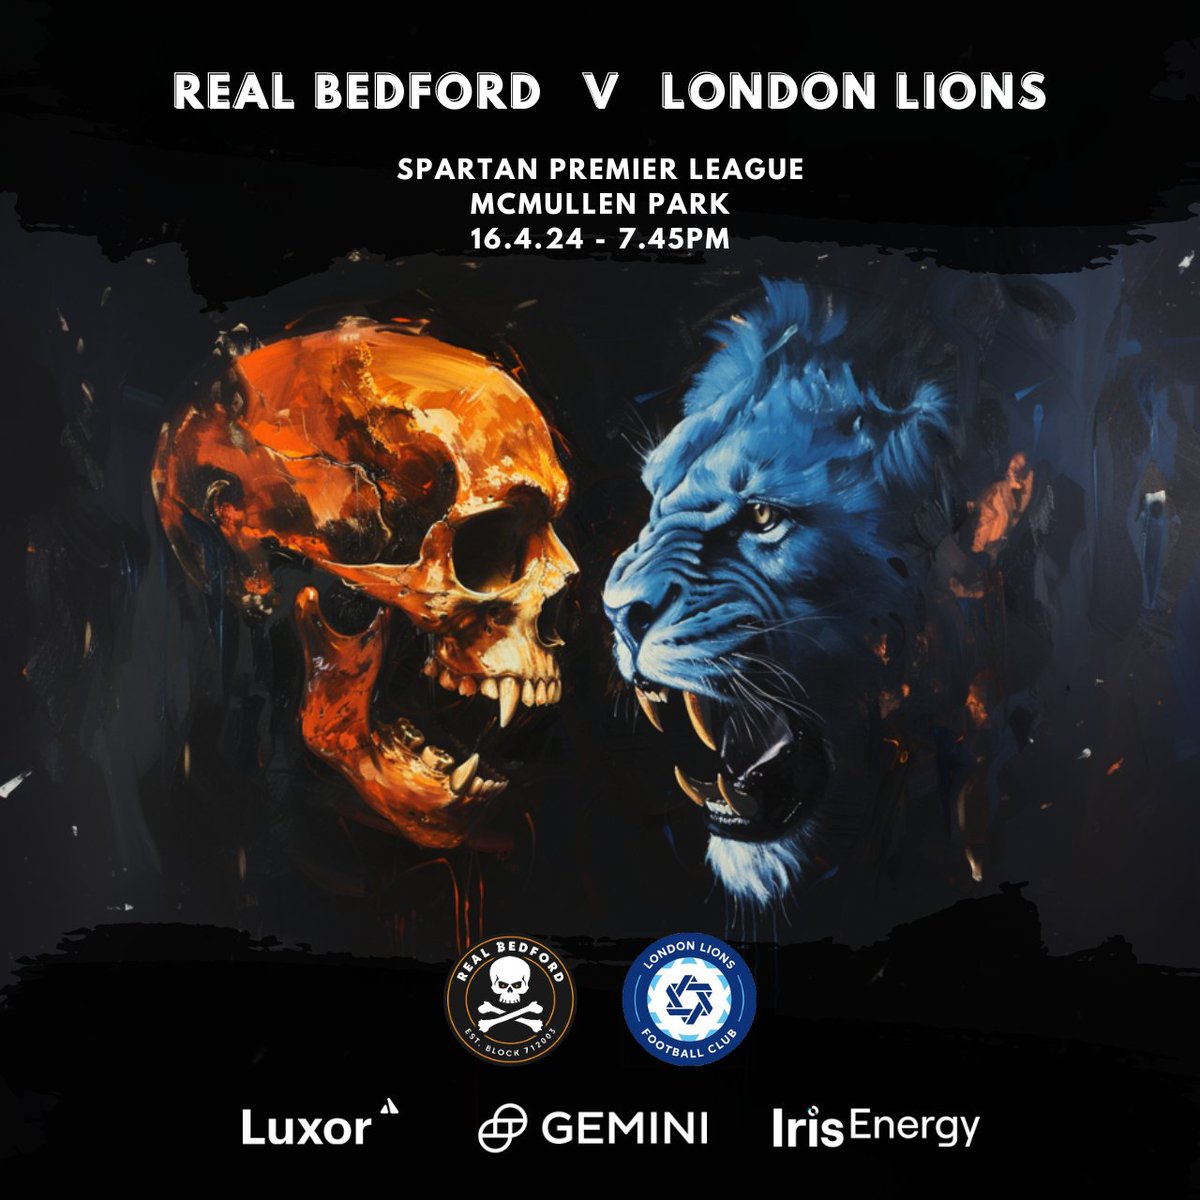 It is the big one tomorrow evening where we can win the league, but we need to beat @LondonLions_. Kick-off is 7.45pm @ McMullen Park. Come down and cheer the lads on. Tickets: realbedford.com/real-bedford-v…